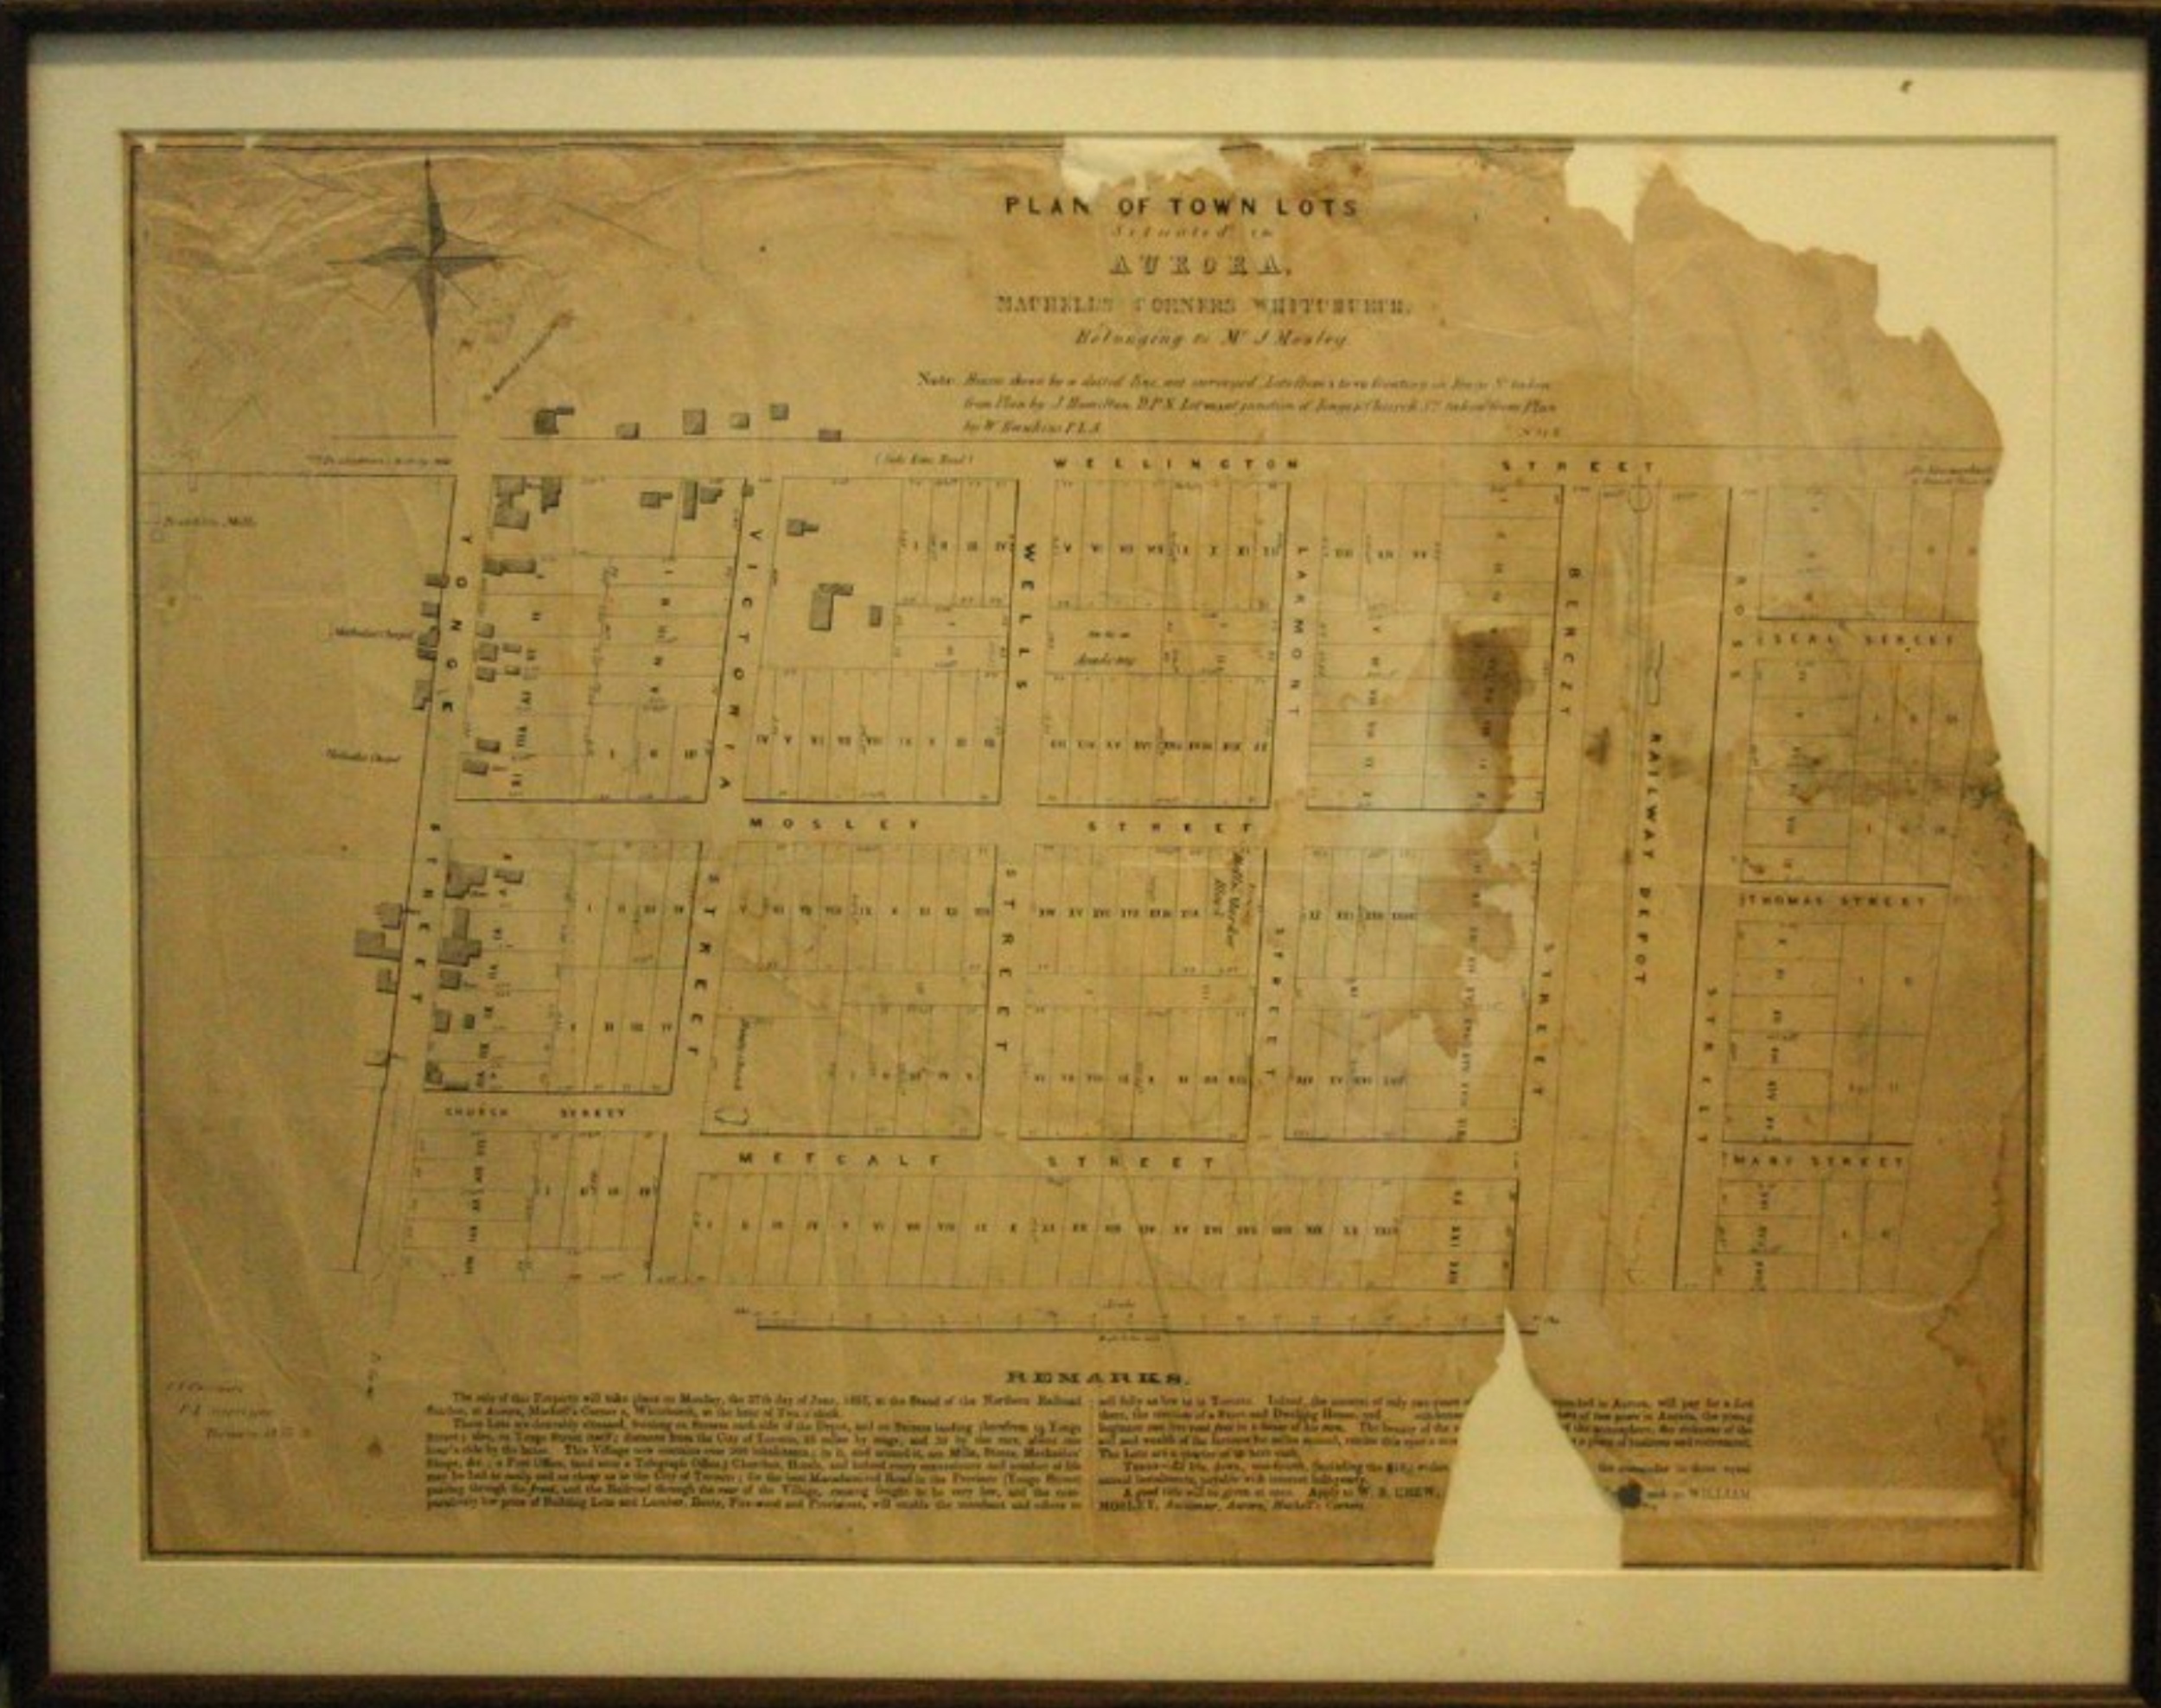 A yellowed and torn map a a town street and lot plan.